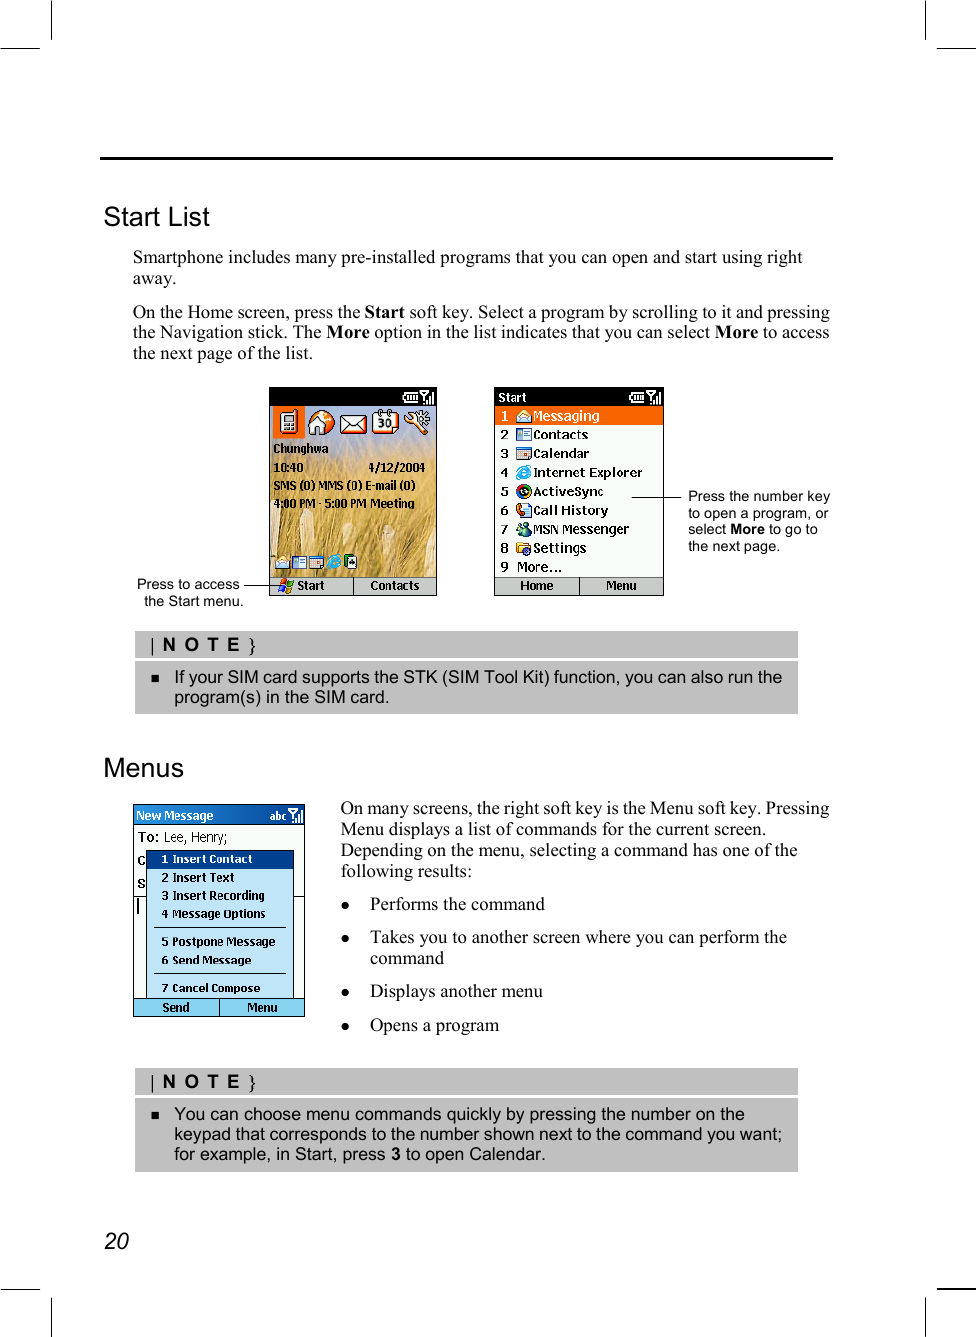  20  Start List Smartphone includes many pre-installed programs that you can open and start using right away. On the Home screen, press the Start soft key. Select a program by scrolling to it and pressing the Navigation stick. The More option in the list indicates that you can select More to access the next page of the list.     |NOTE}   If your SIM card supports the STK (SIM Tool Kit) function, you can also run the program(s) in the SIM card.  Menus  On many screens, the right soft key is the Menu soft key. Pressing Menu displays a list of commands for the current screen. Depending on the menu, selecting a command has one of the following results:   Performs the command   Takes you to another screen where you can perform the command   Displays another menu   Opens a program  |NOTE}   You can choose menu commands quickly by pressing the number on the keypad that corresponds to the number shown next to the command you want; for example, in Start, press 3 to open Calendar.  Press to access the Start menu.Press the number key to open a program, or select More to go to the next page. 